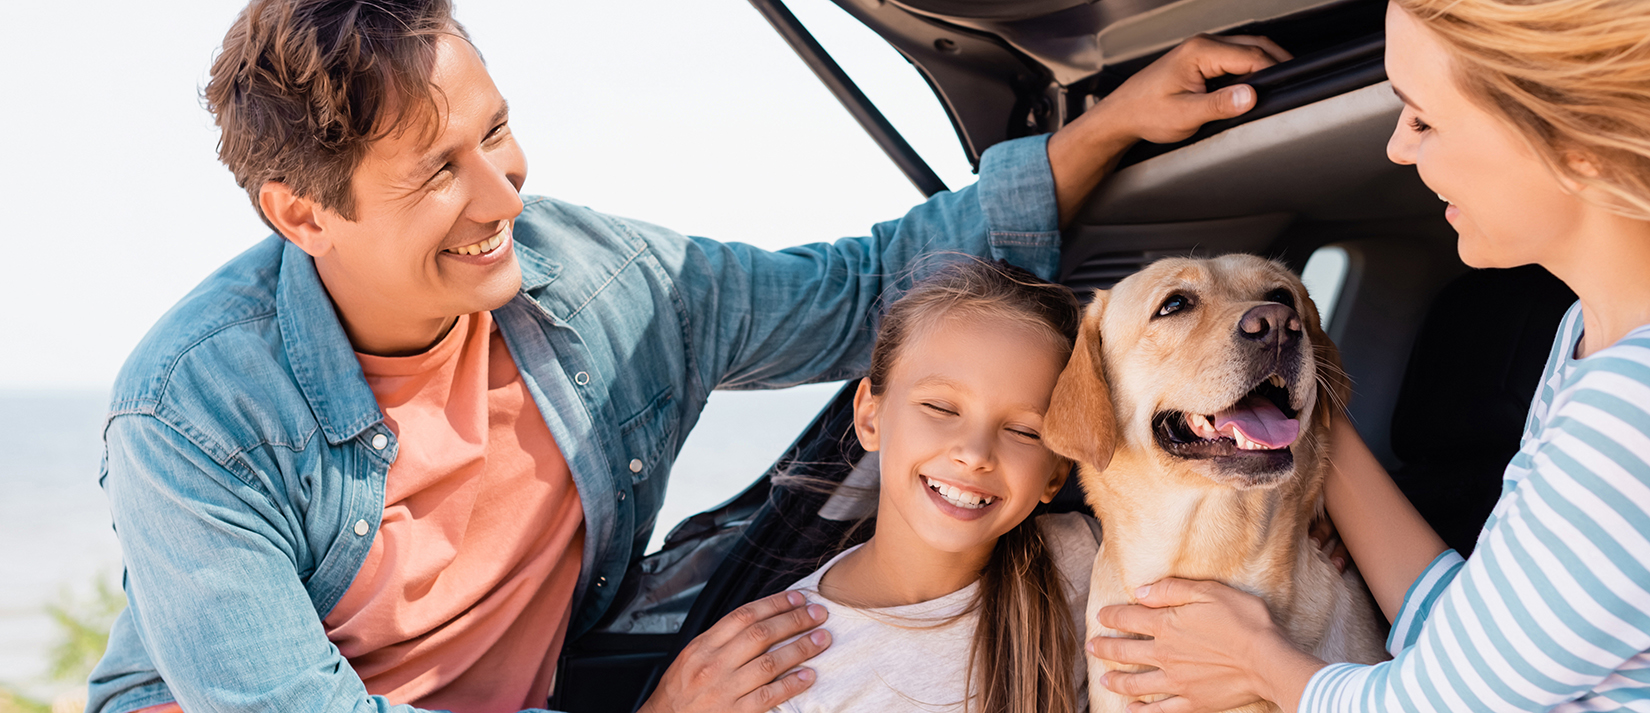 Horizontal crop of family with golden retriever standing near auto on beach